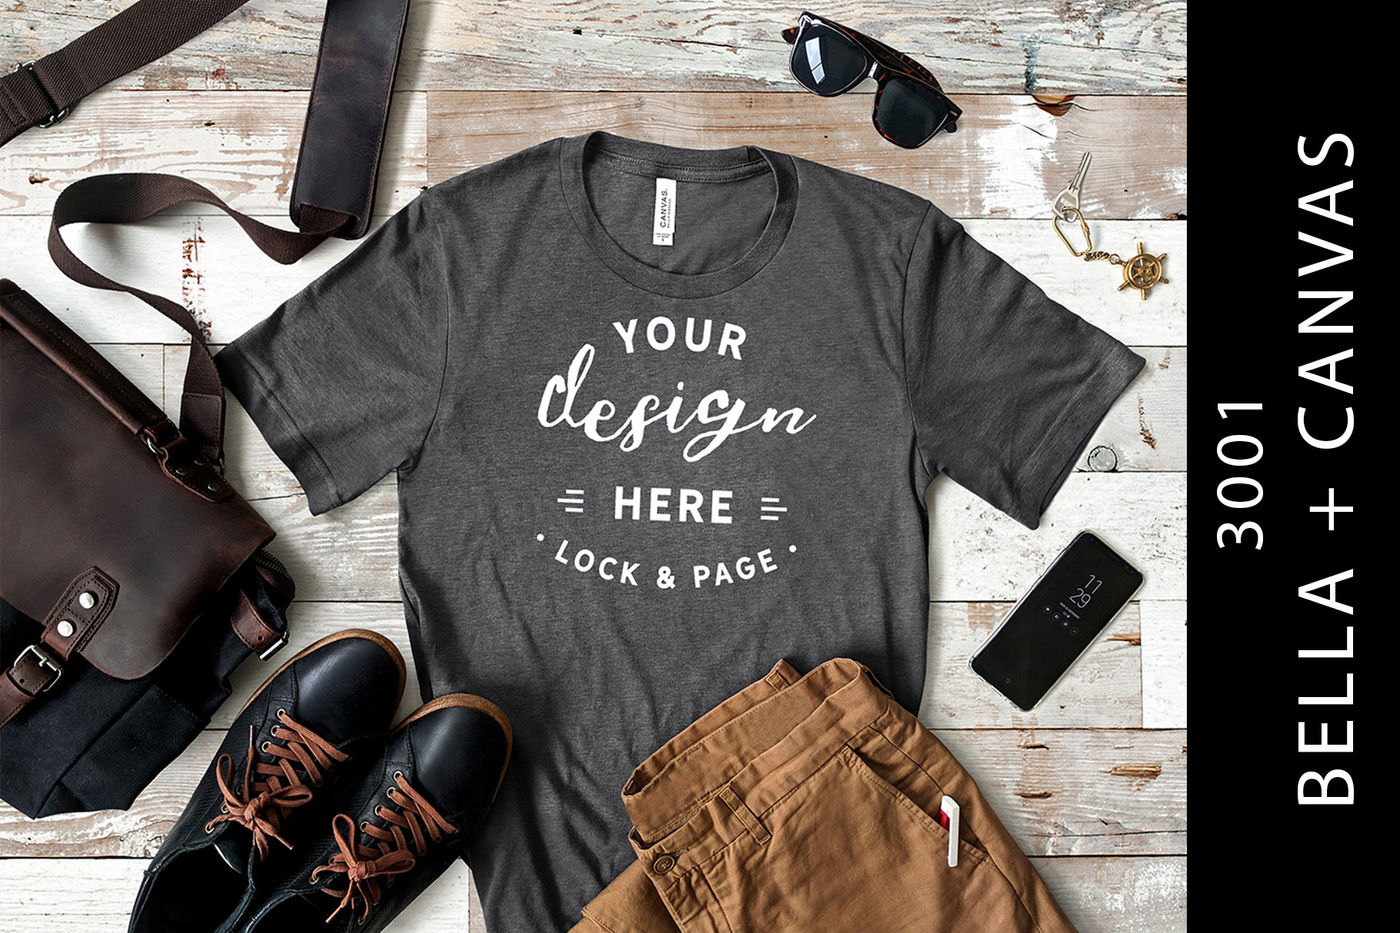 Download Dark Grey Heather Bella Canvas 3001 T-Shirt Men's Mockup By Lock and Page | TheHungryJPEG.com